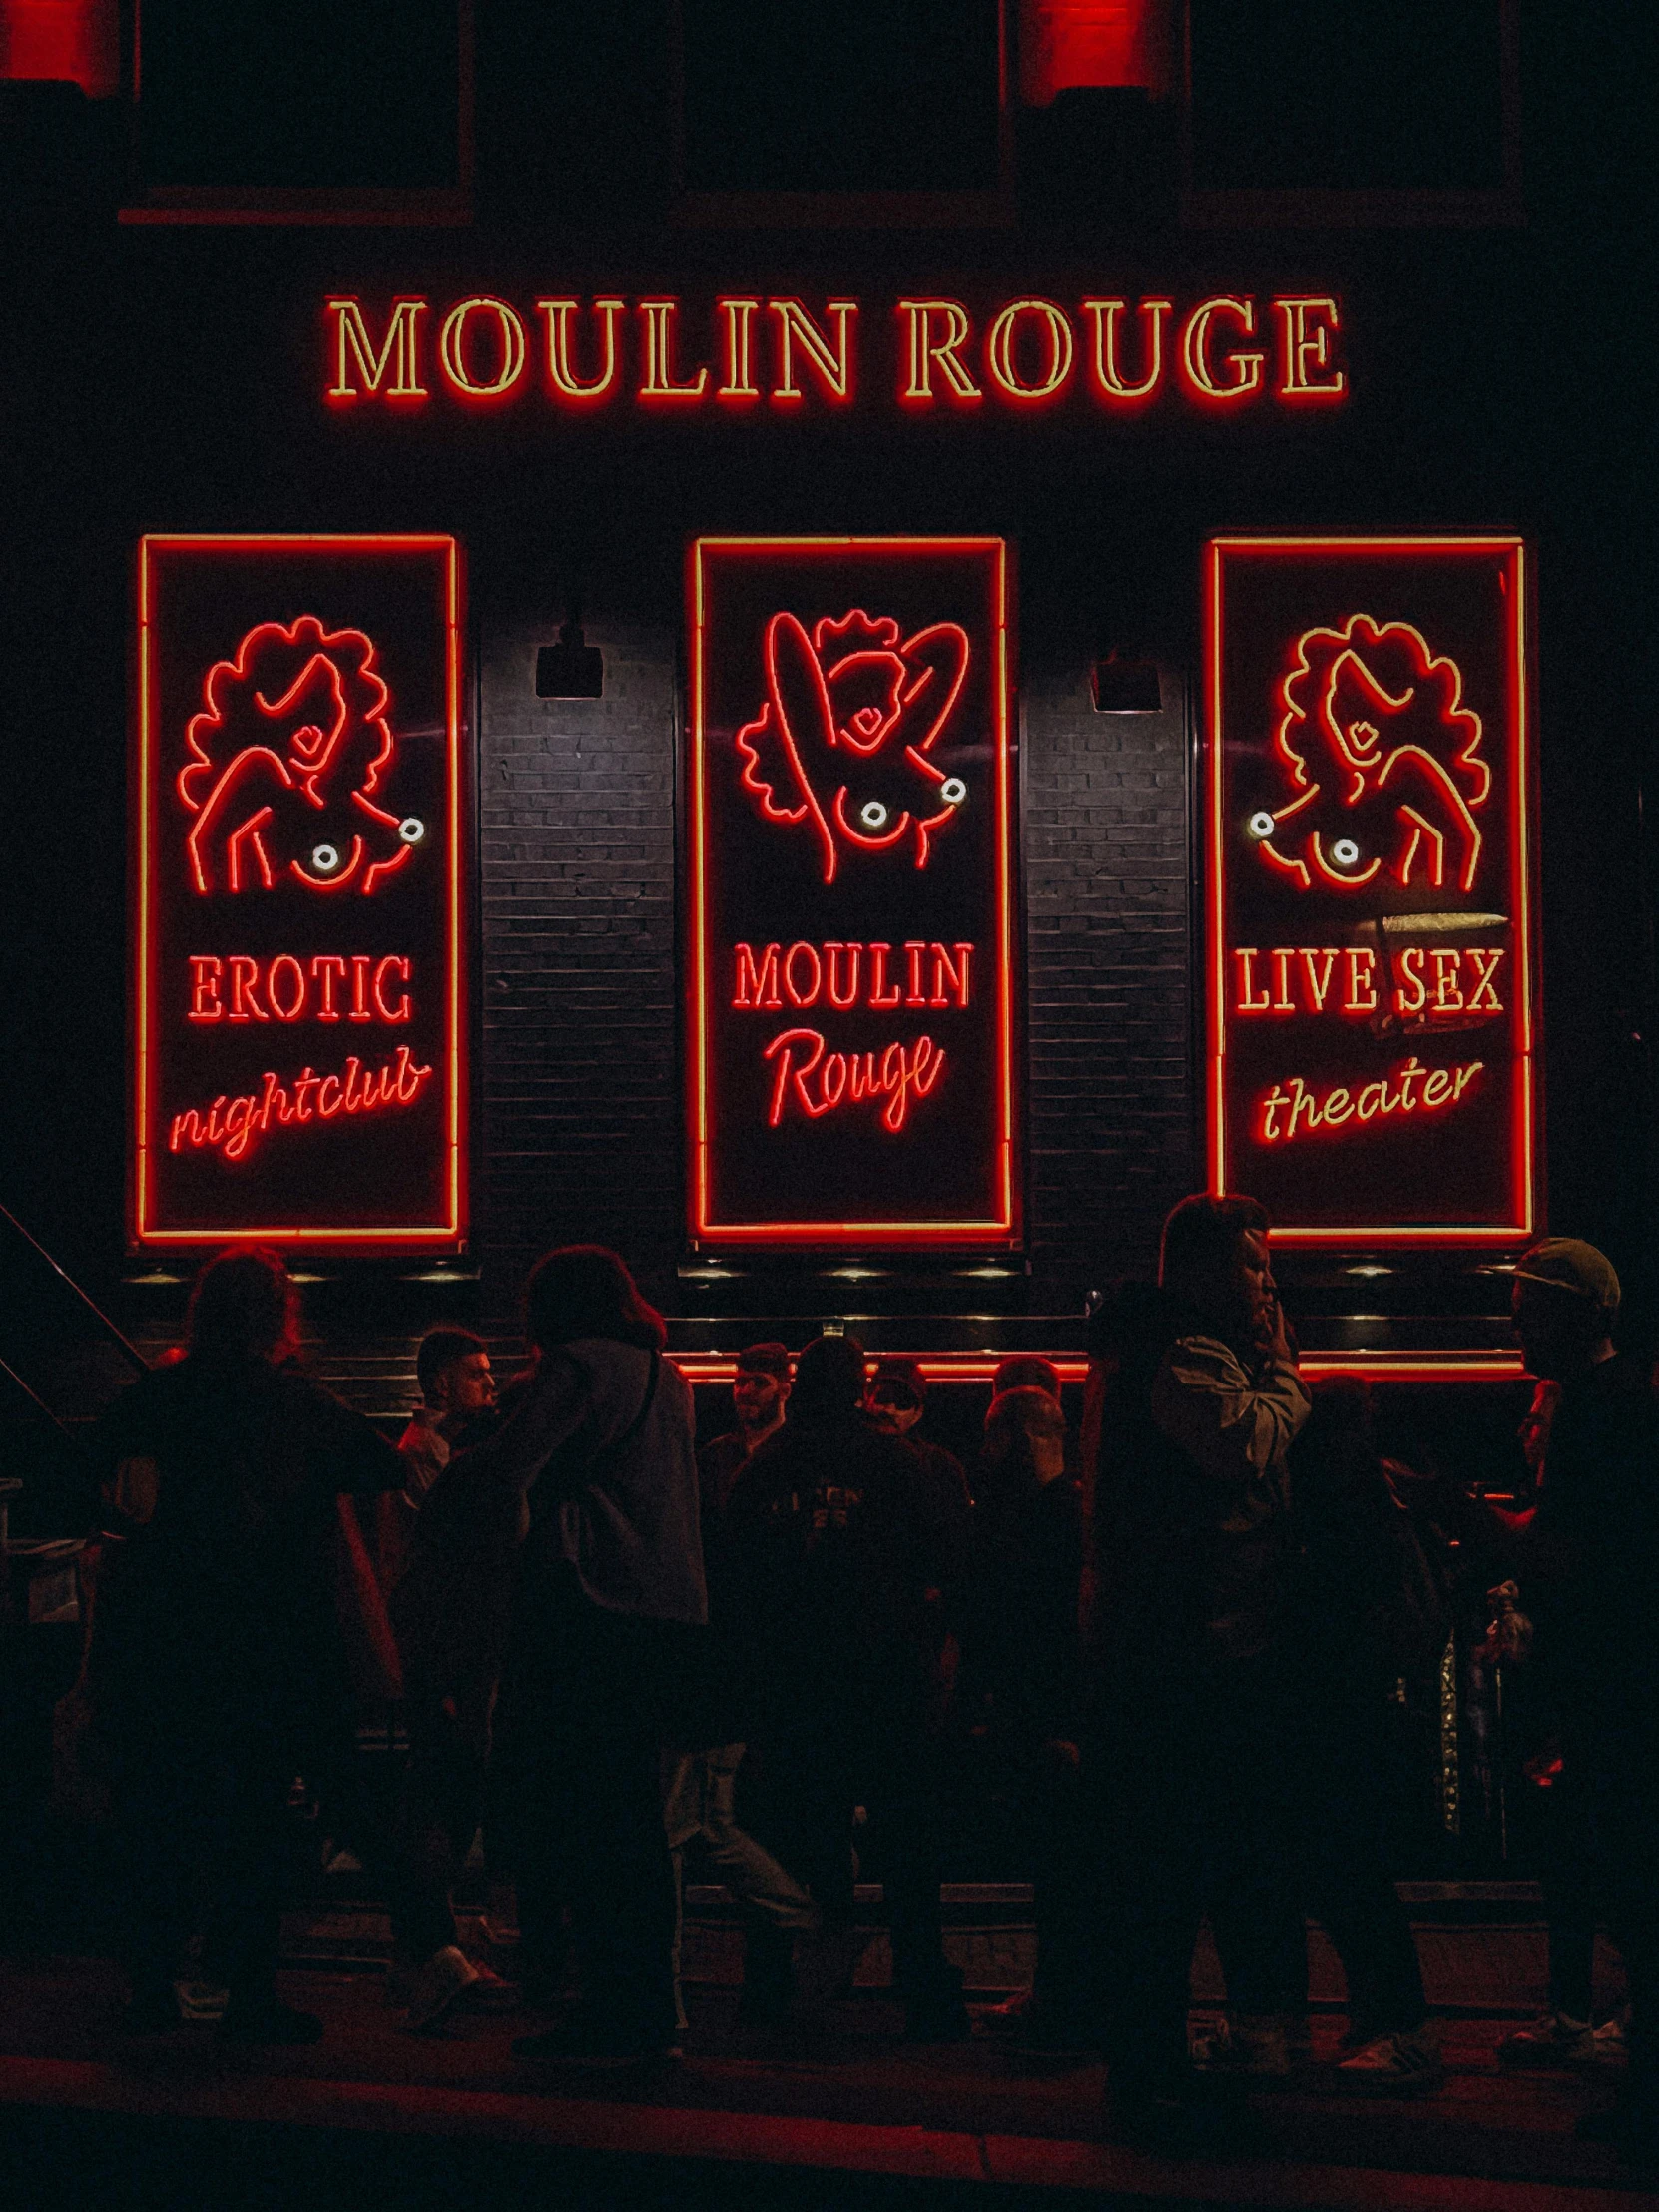 the words moulin roue are red and yellow